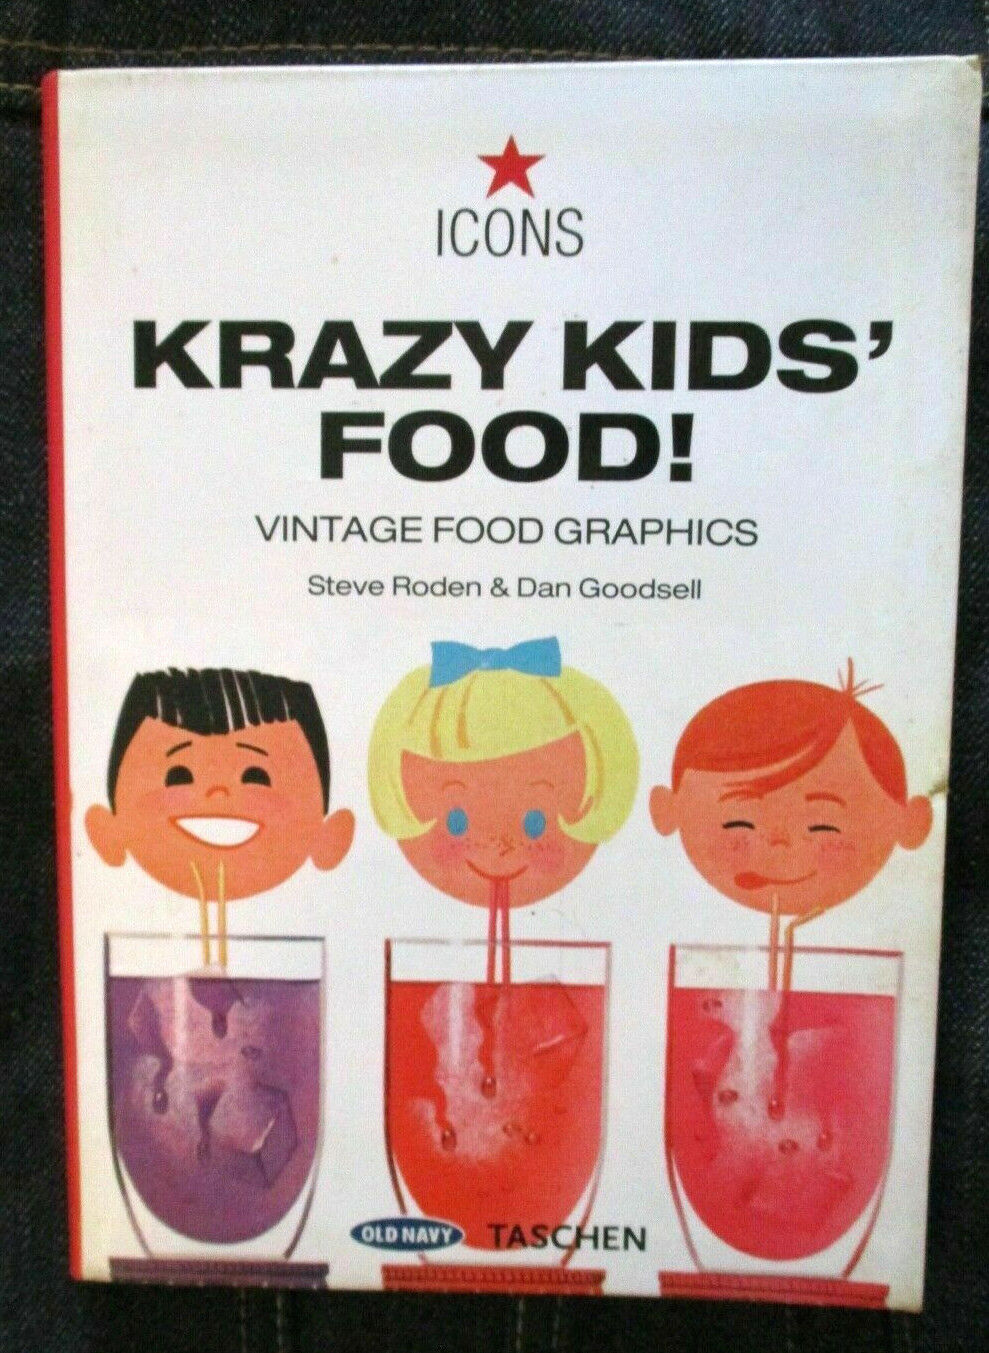 Krazy Kids\' Food - Vintage Food Graphics by Goodsell & Roden (2004, Old Navy)